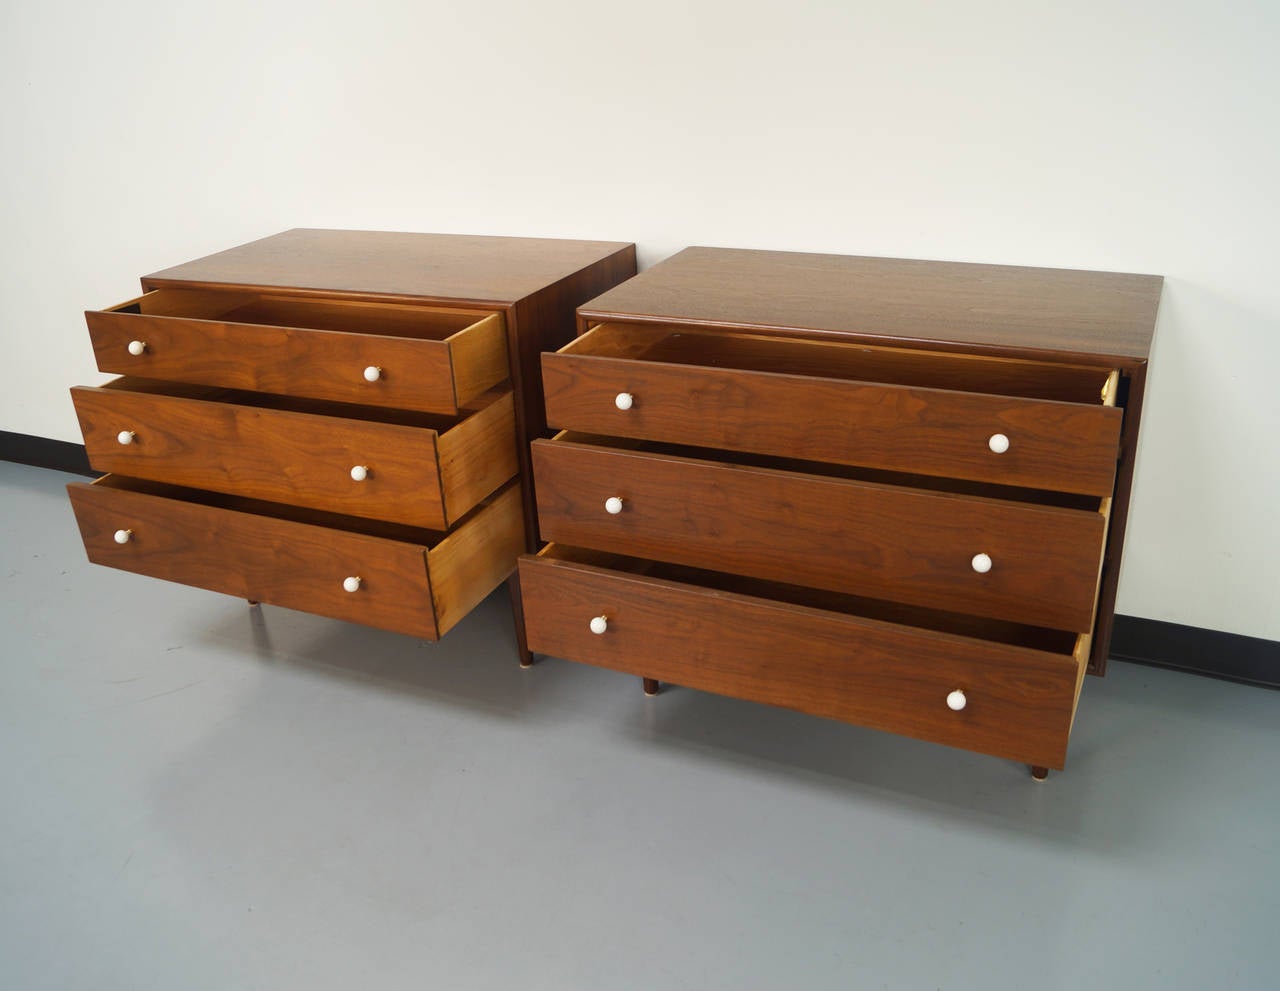 A wonderful pair of vintage chests of drawers designed by Kipp Stewart & Stewart McDougall for Drexel 